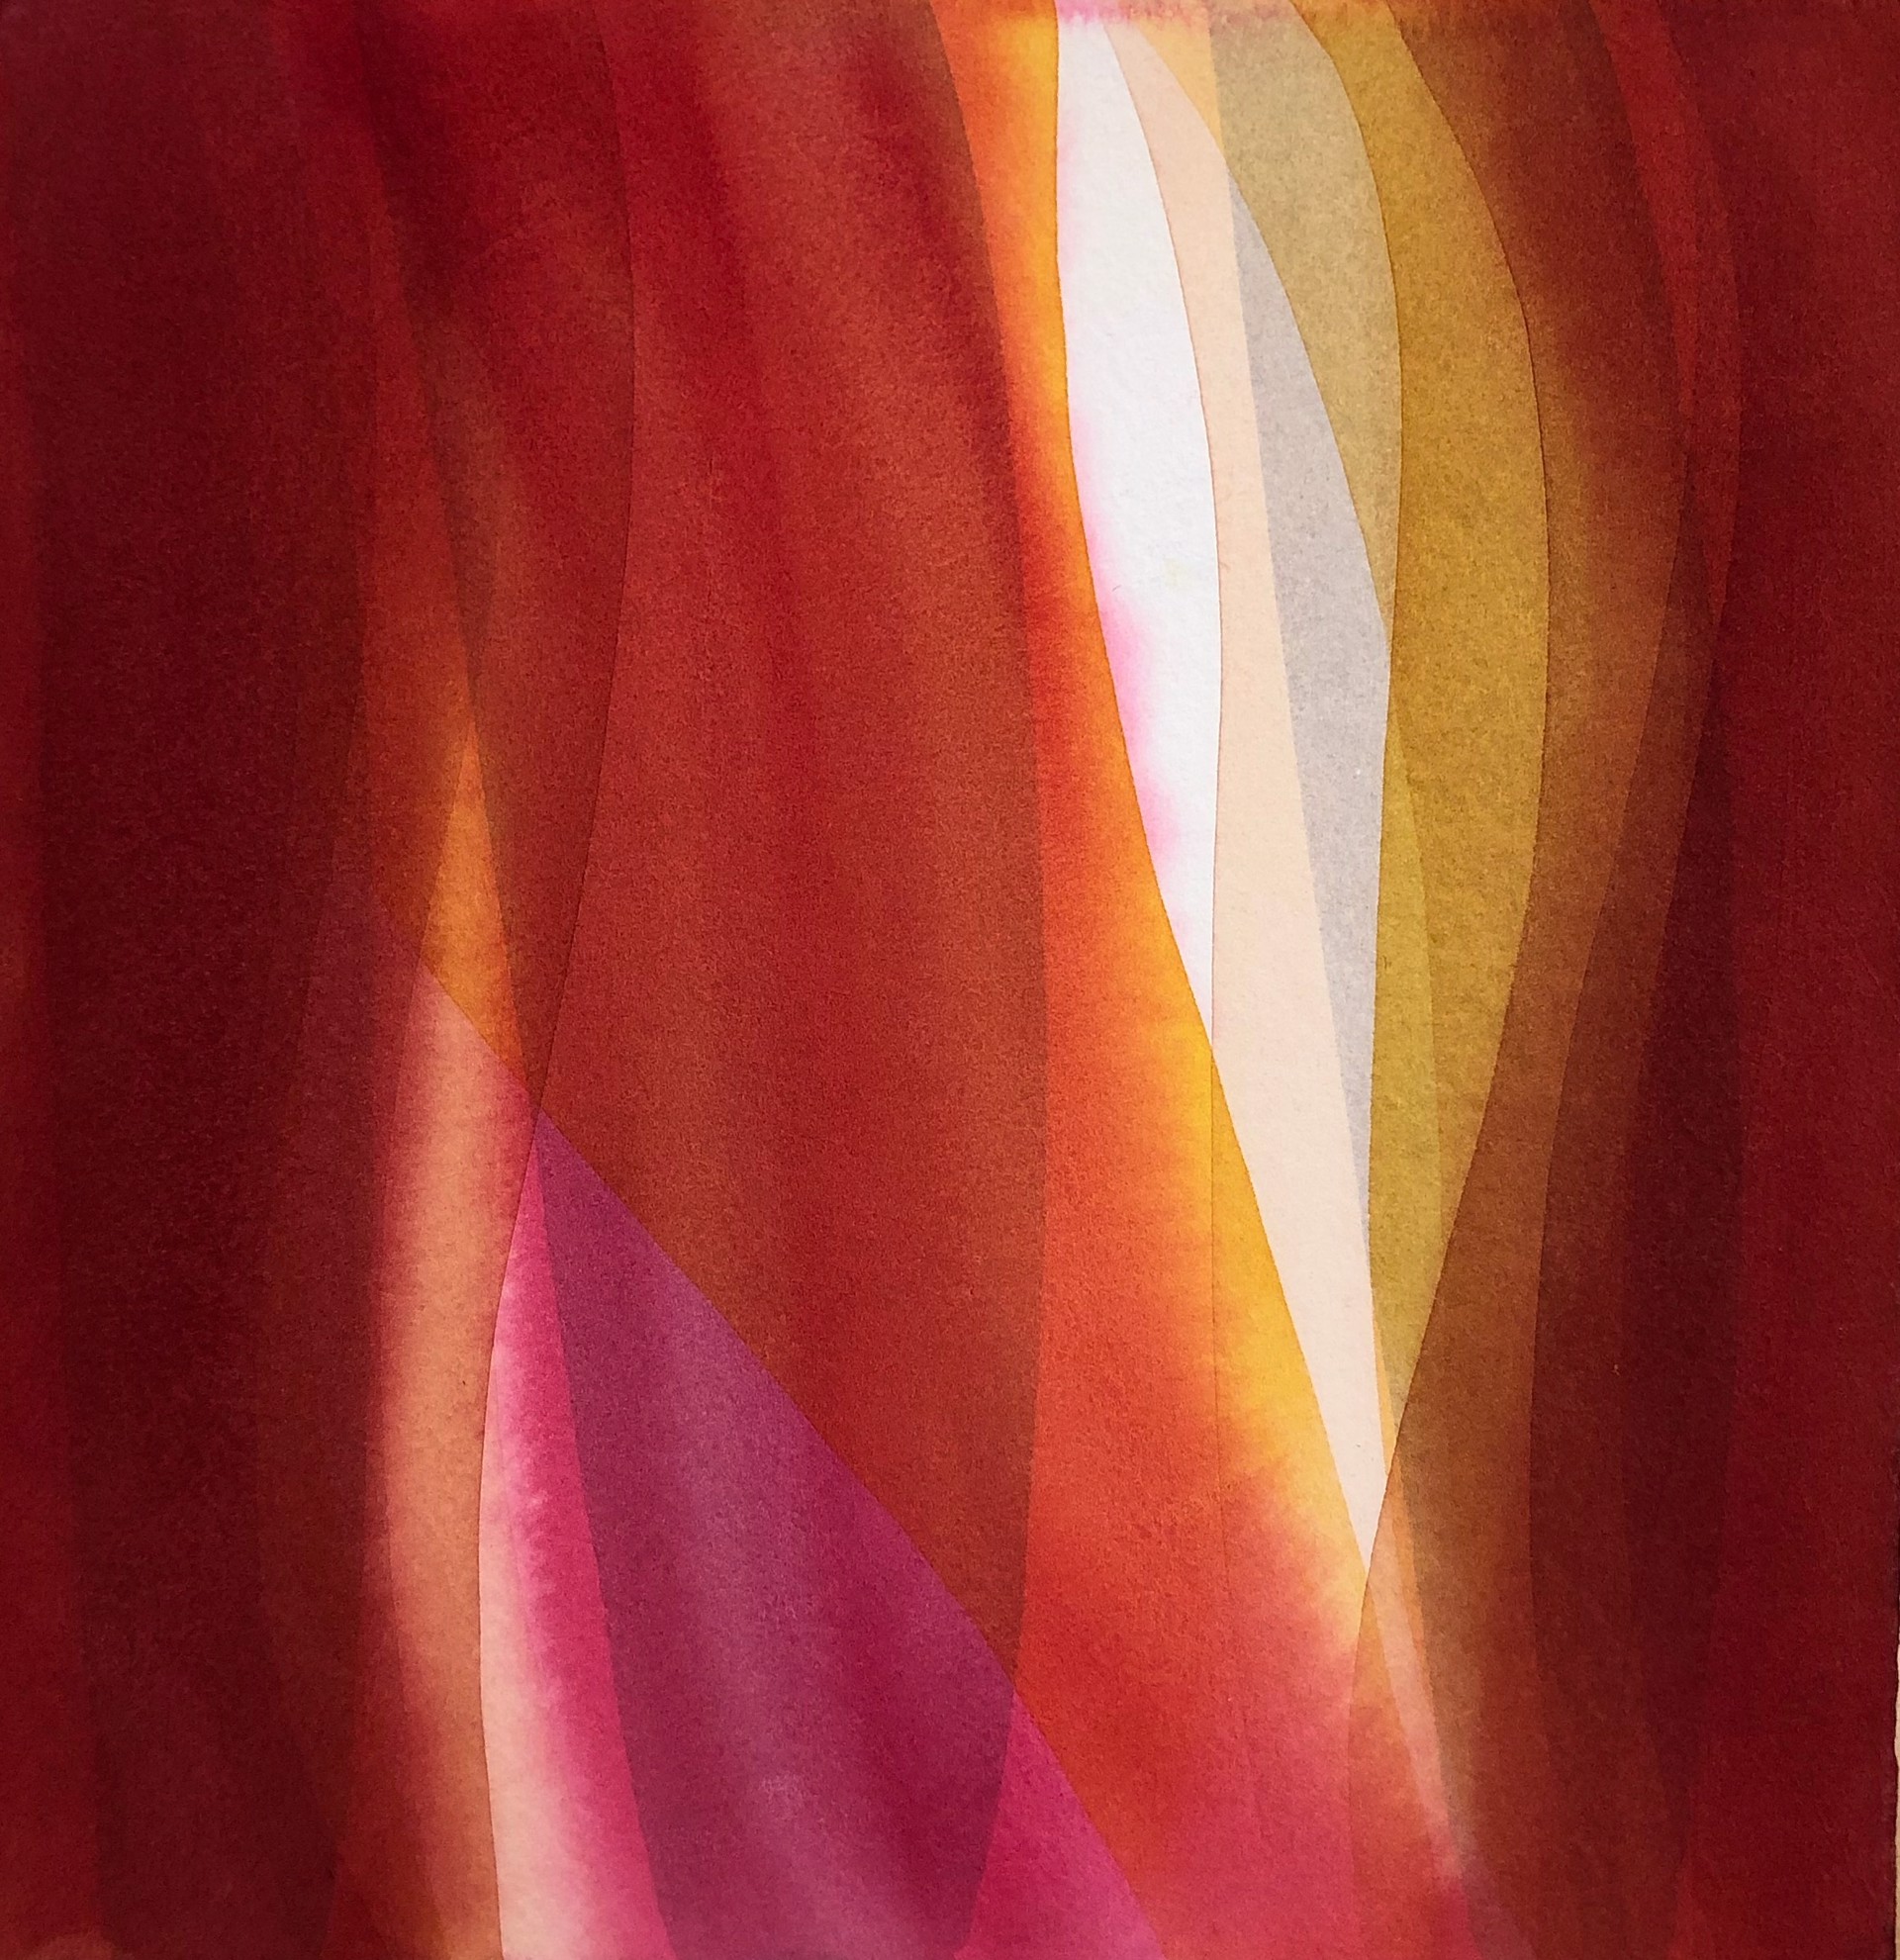 Untitled (Red Waves) by Jan Heaton